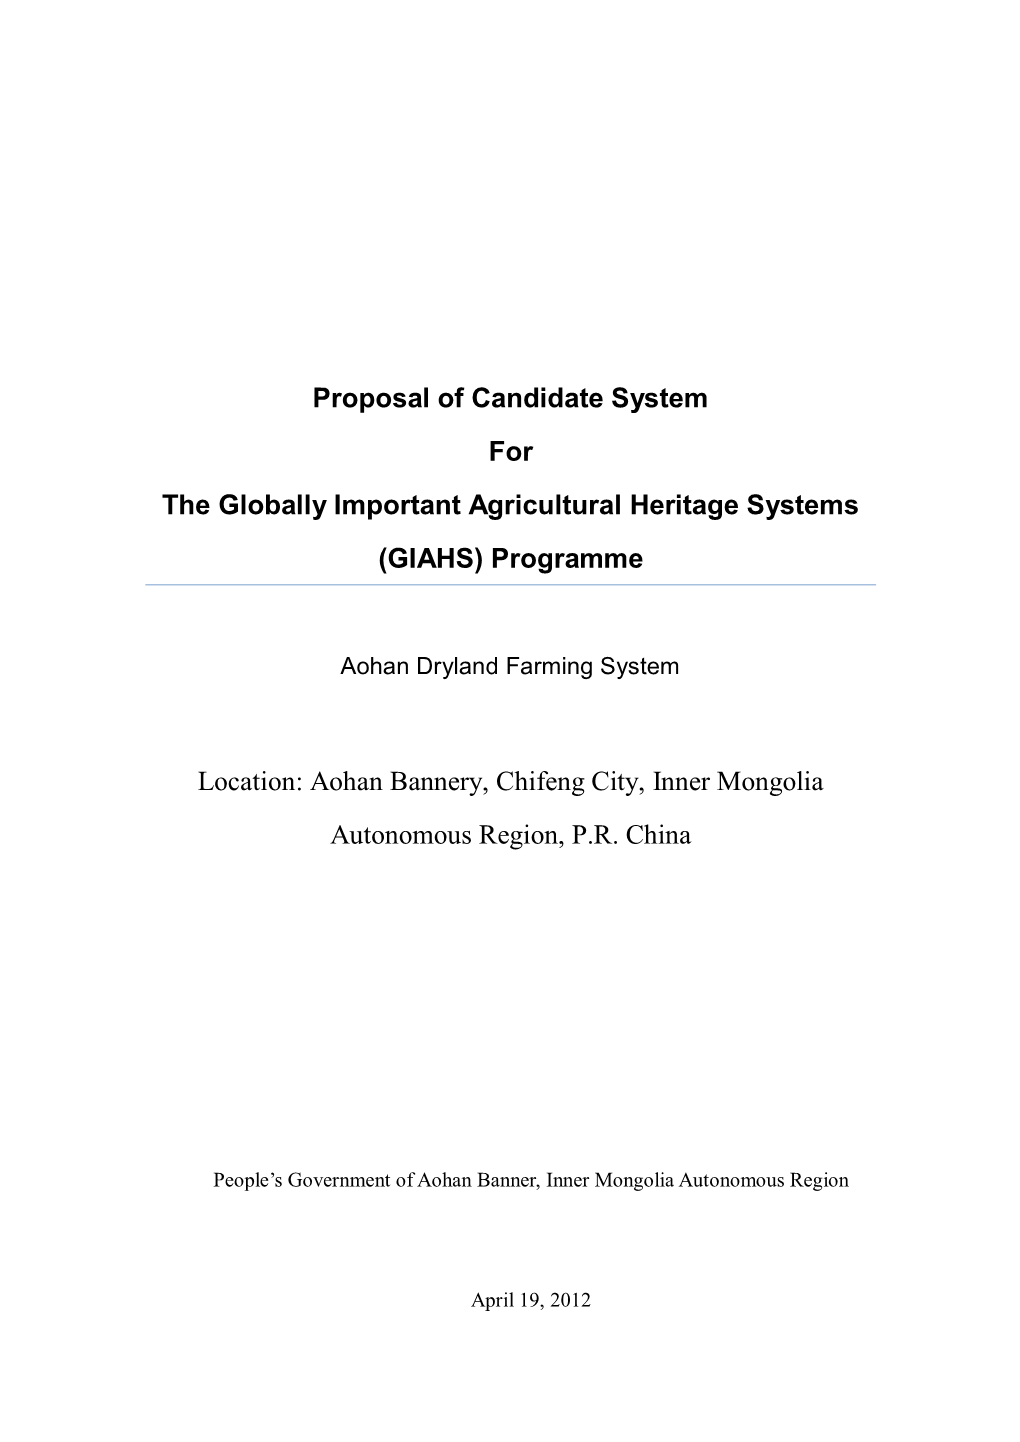 Proposal of Candidate System for the Globally Important Agricultural Heritage Systems (GIAHS) Programme